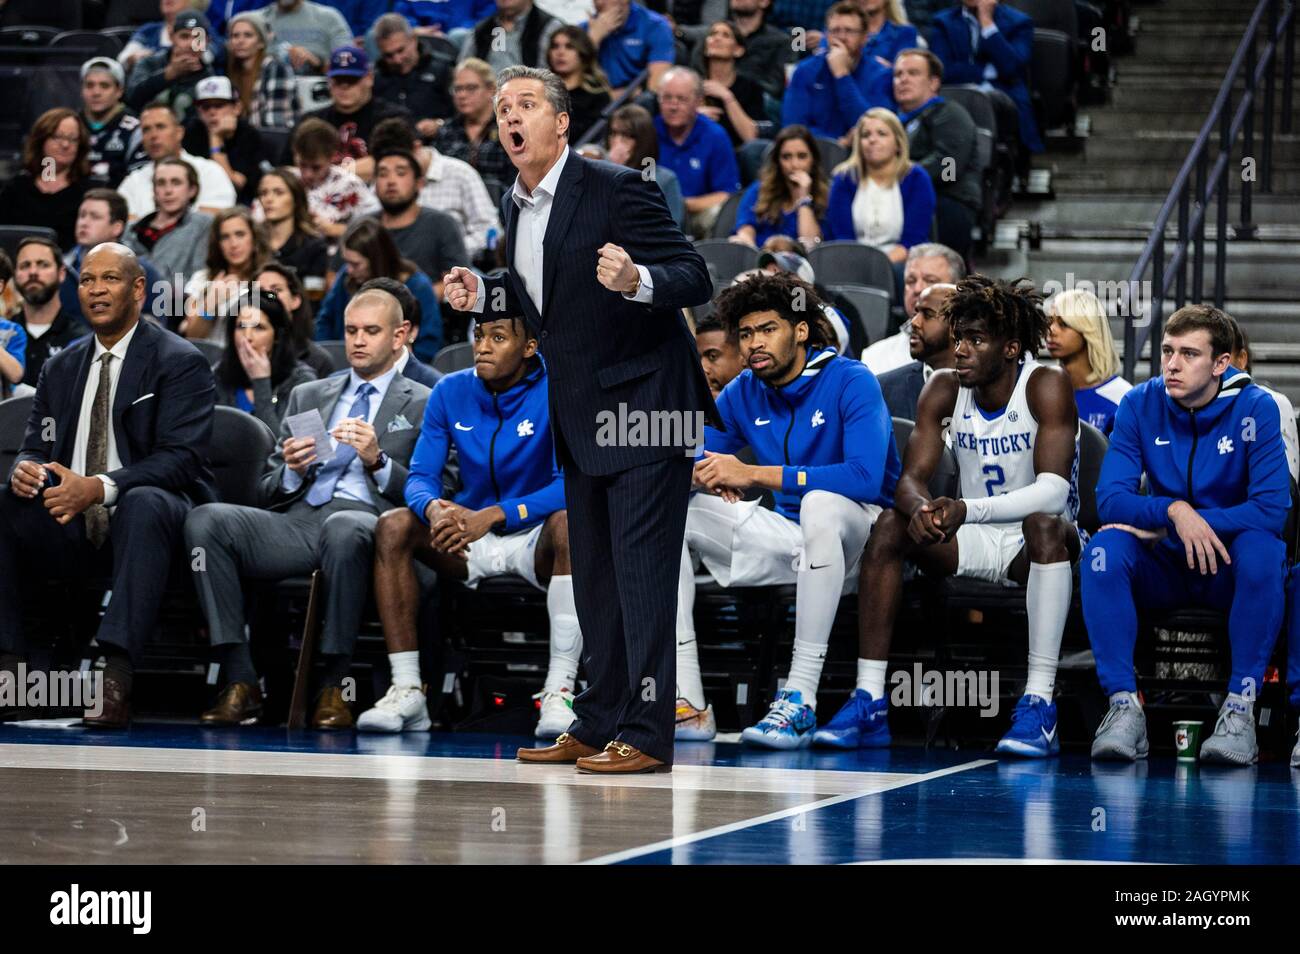 Las Vegas, NV U.S. 21st Dec, 2019. A. Kentucky Wildcats head coach John Calipari on the court during the NCAA MenÕs Basketball CBS Sports Classic between the Ohio State Buckeyes and the Kentucky Wildcats 65-71 lost at T-Mobile Arena Las Vegas, NV. Thurman James/CSM/Alamy Live News Stock Photo